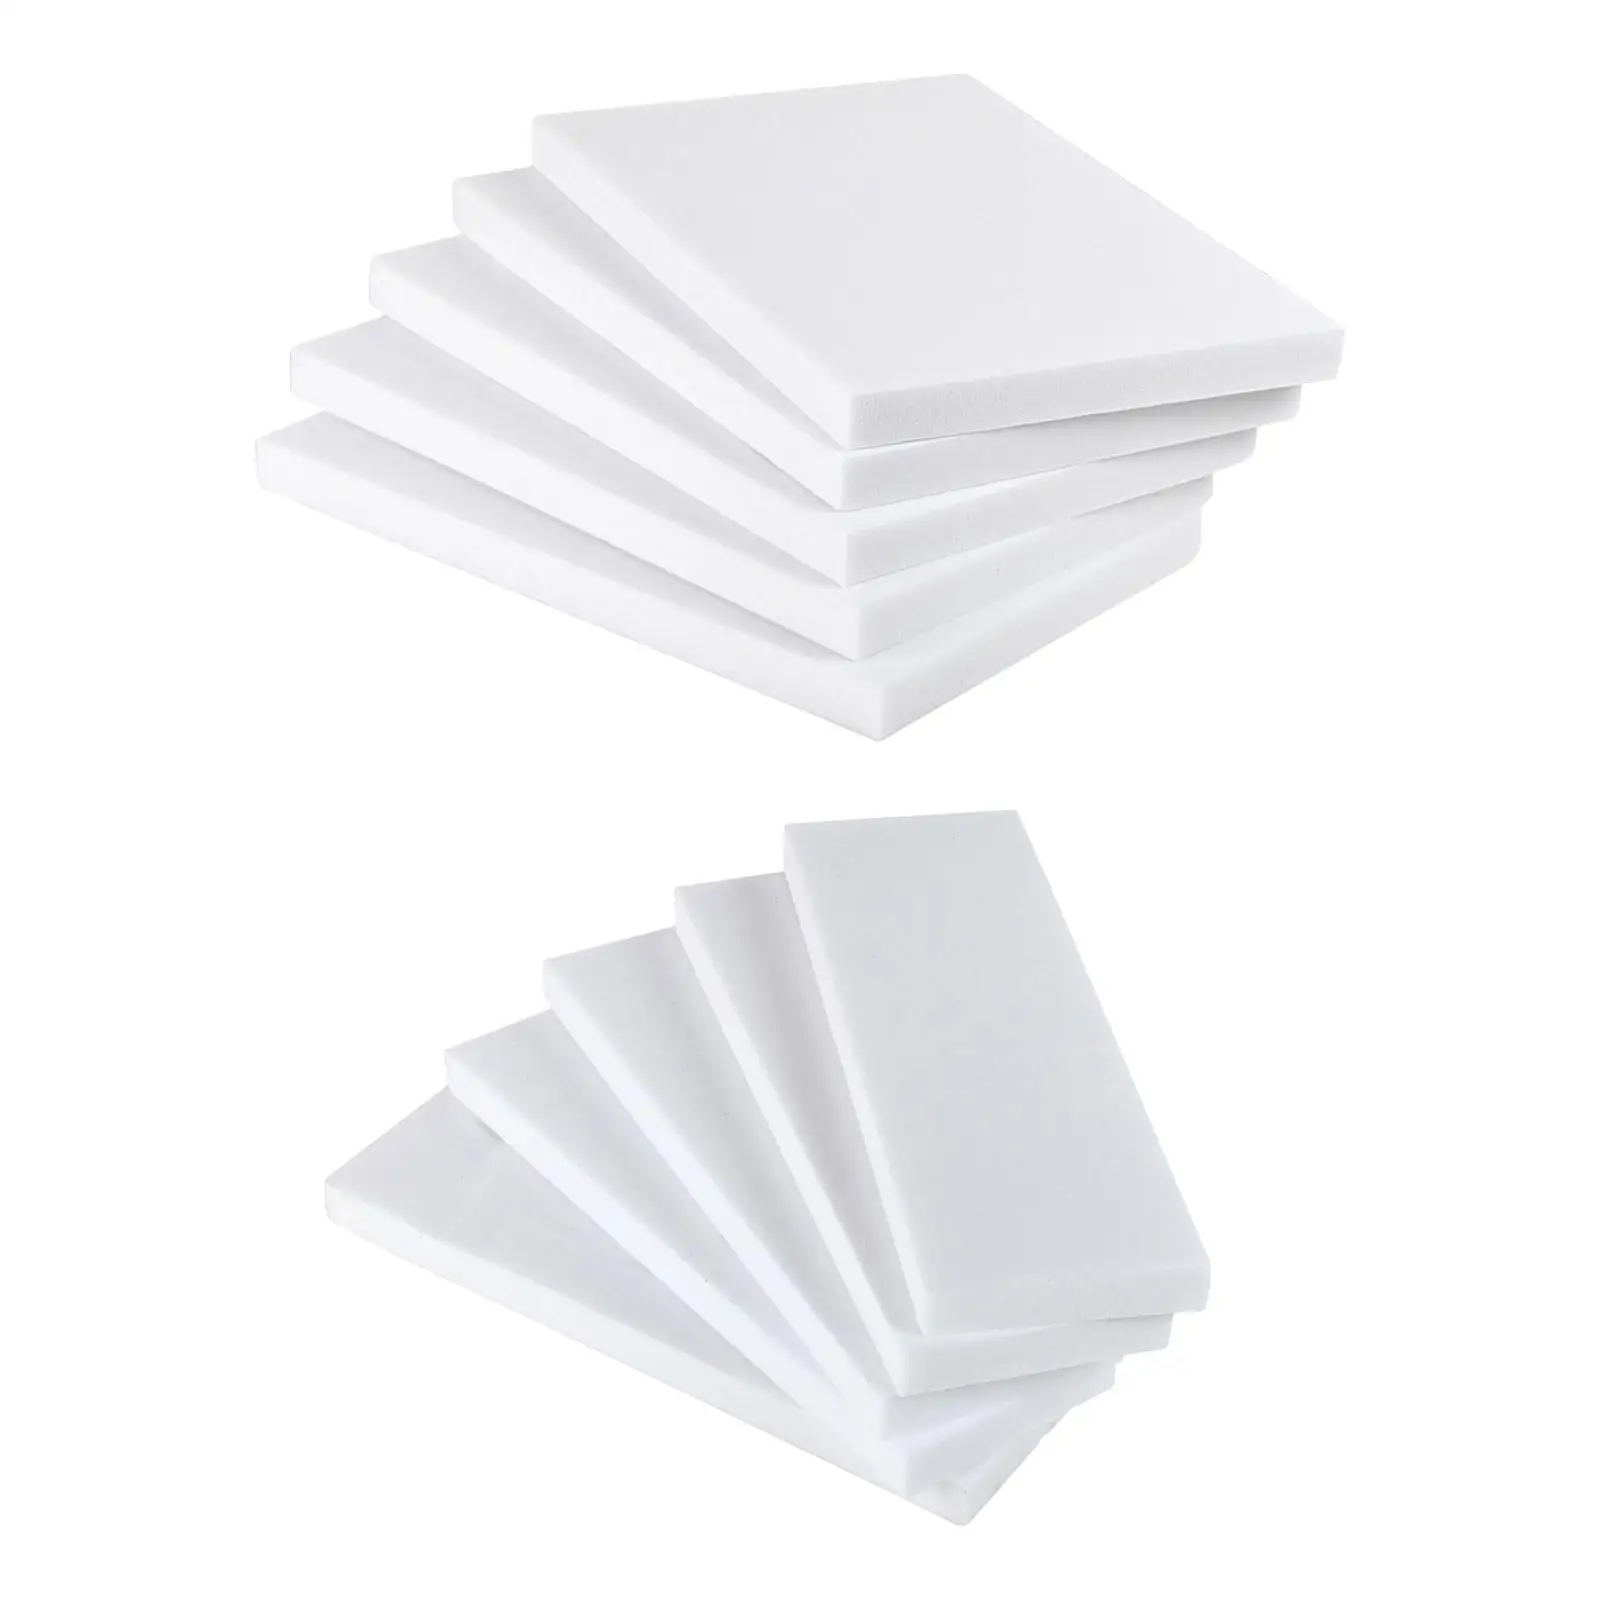 5x Foam Board Diorama Base Sculpting Sheets for Building Mountains Dollhouse Model Upholstery Landscape Scenery DIY Sculpture